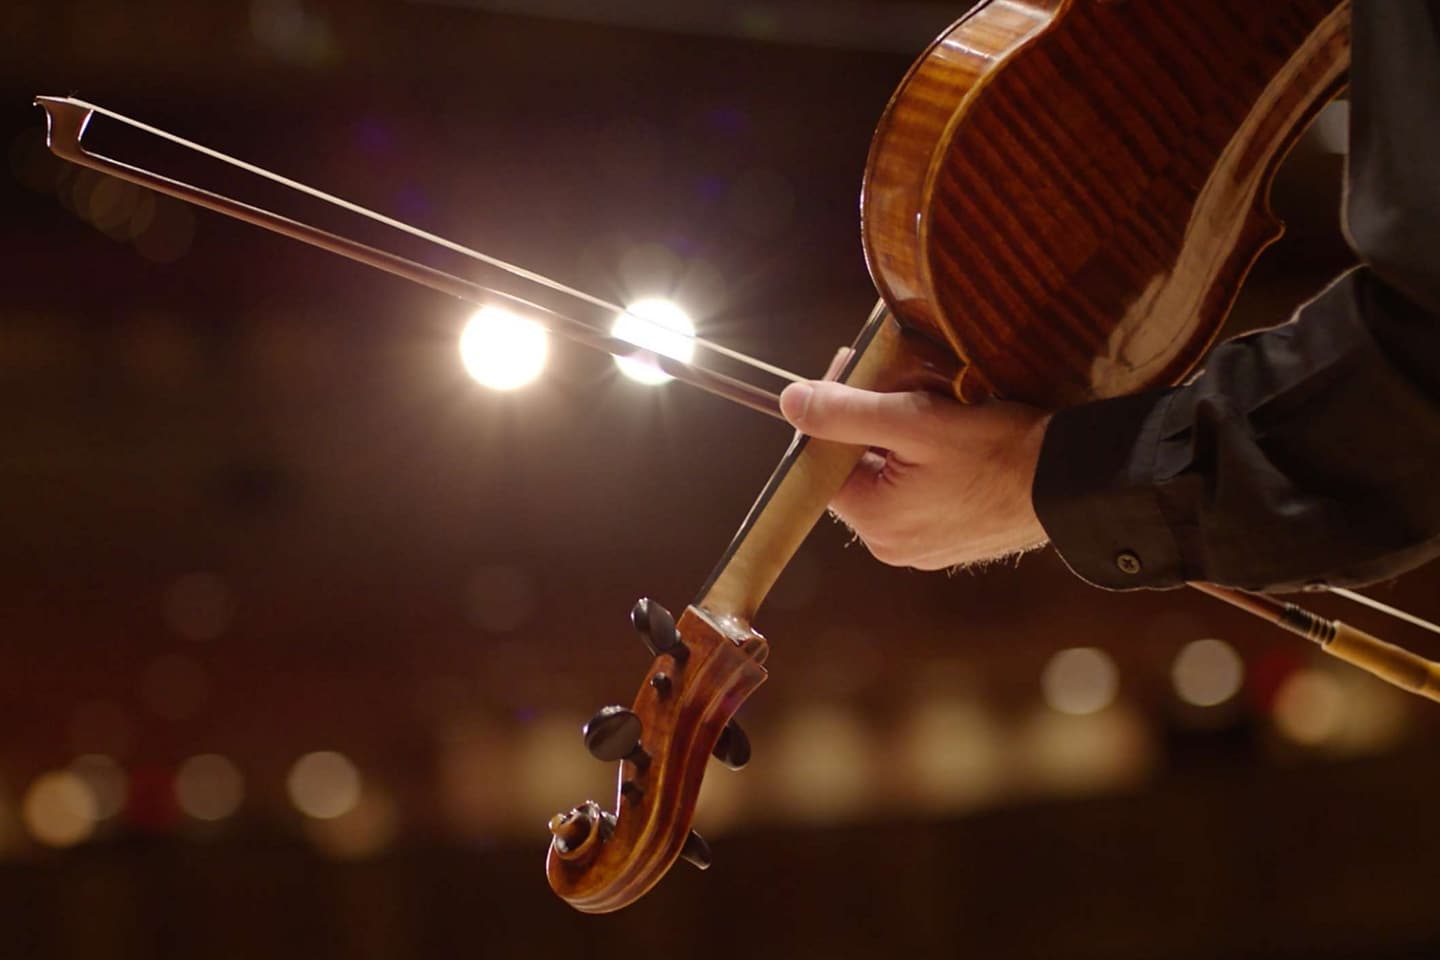 The bow of a musician’s violin slides across stage spotlights to illustrate the dramatic sound of the symphonic chimes.